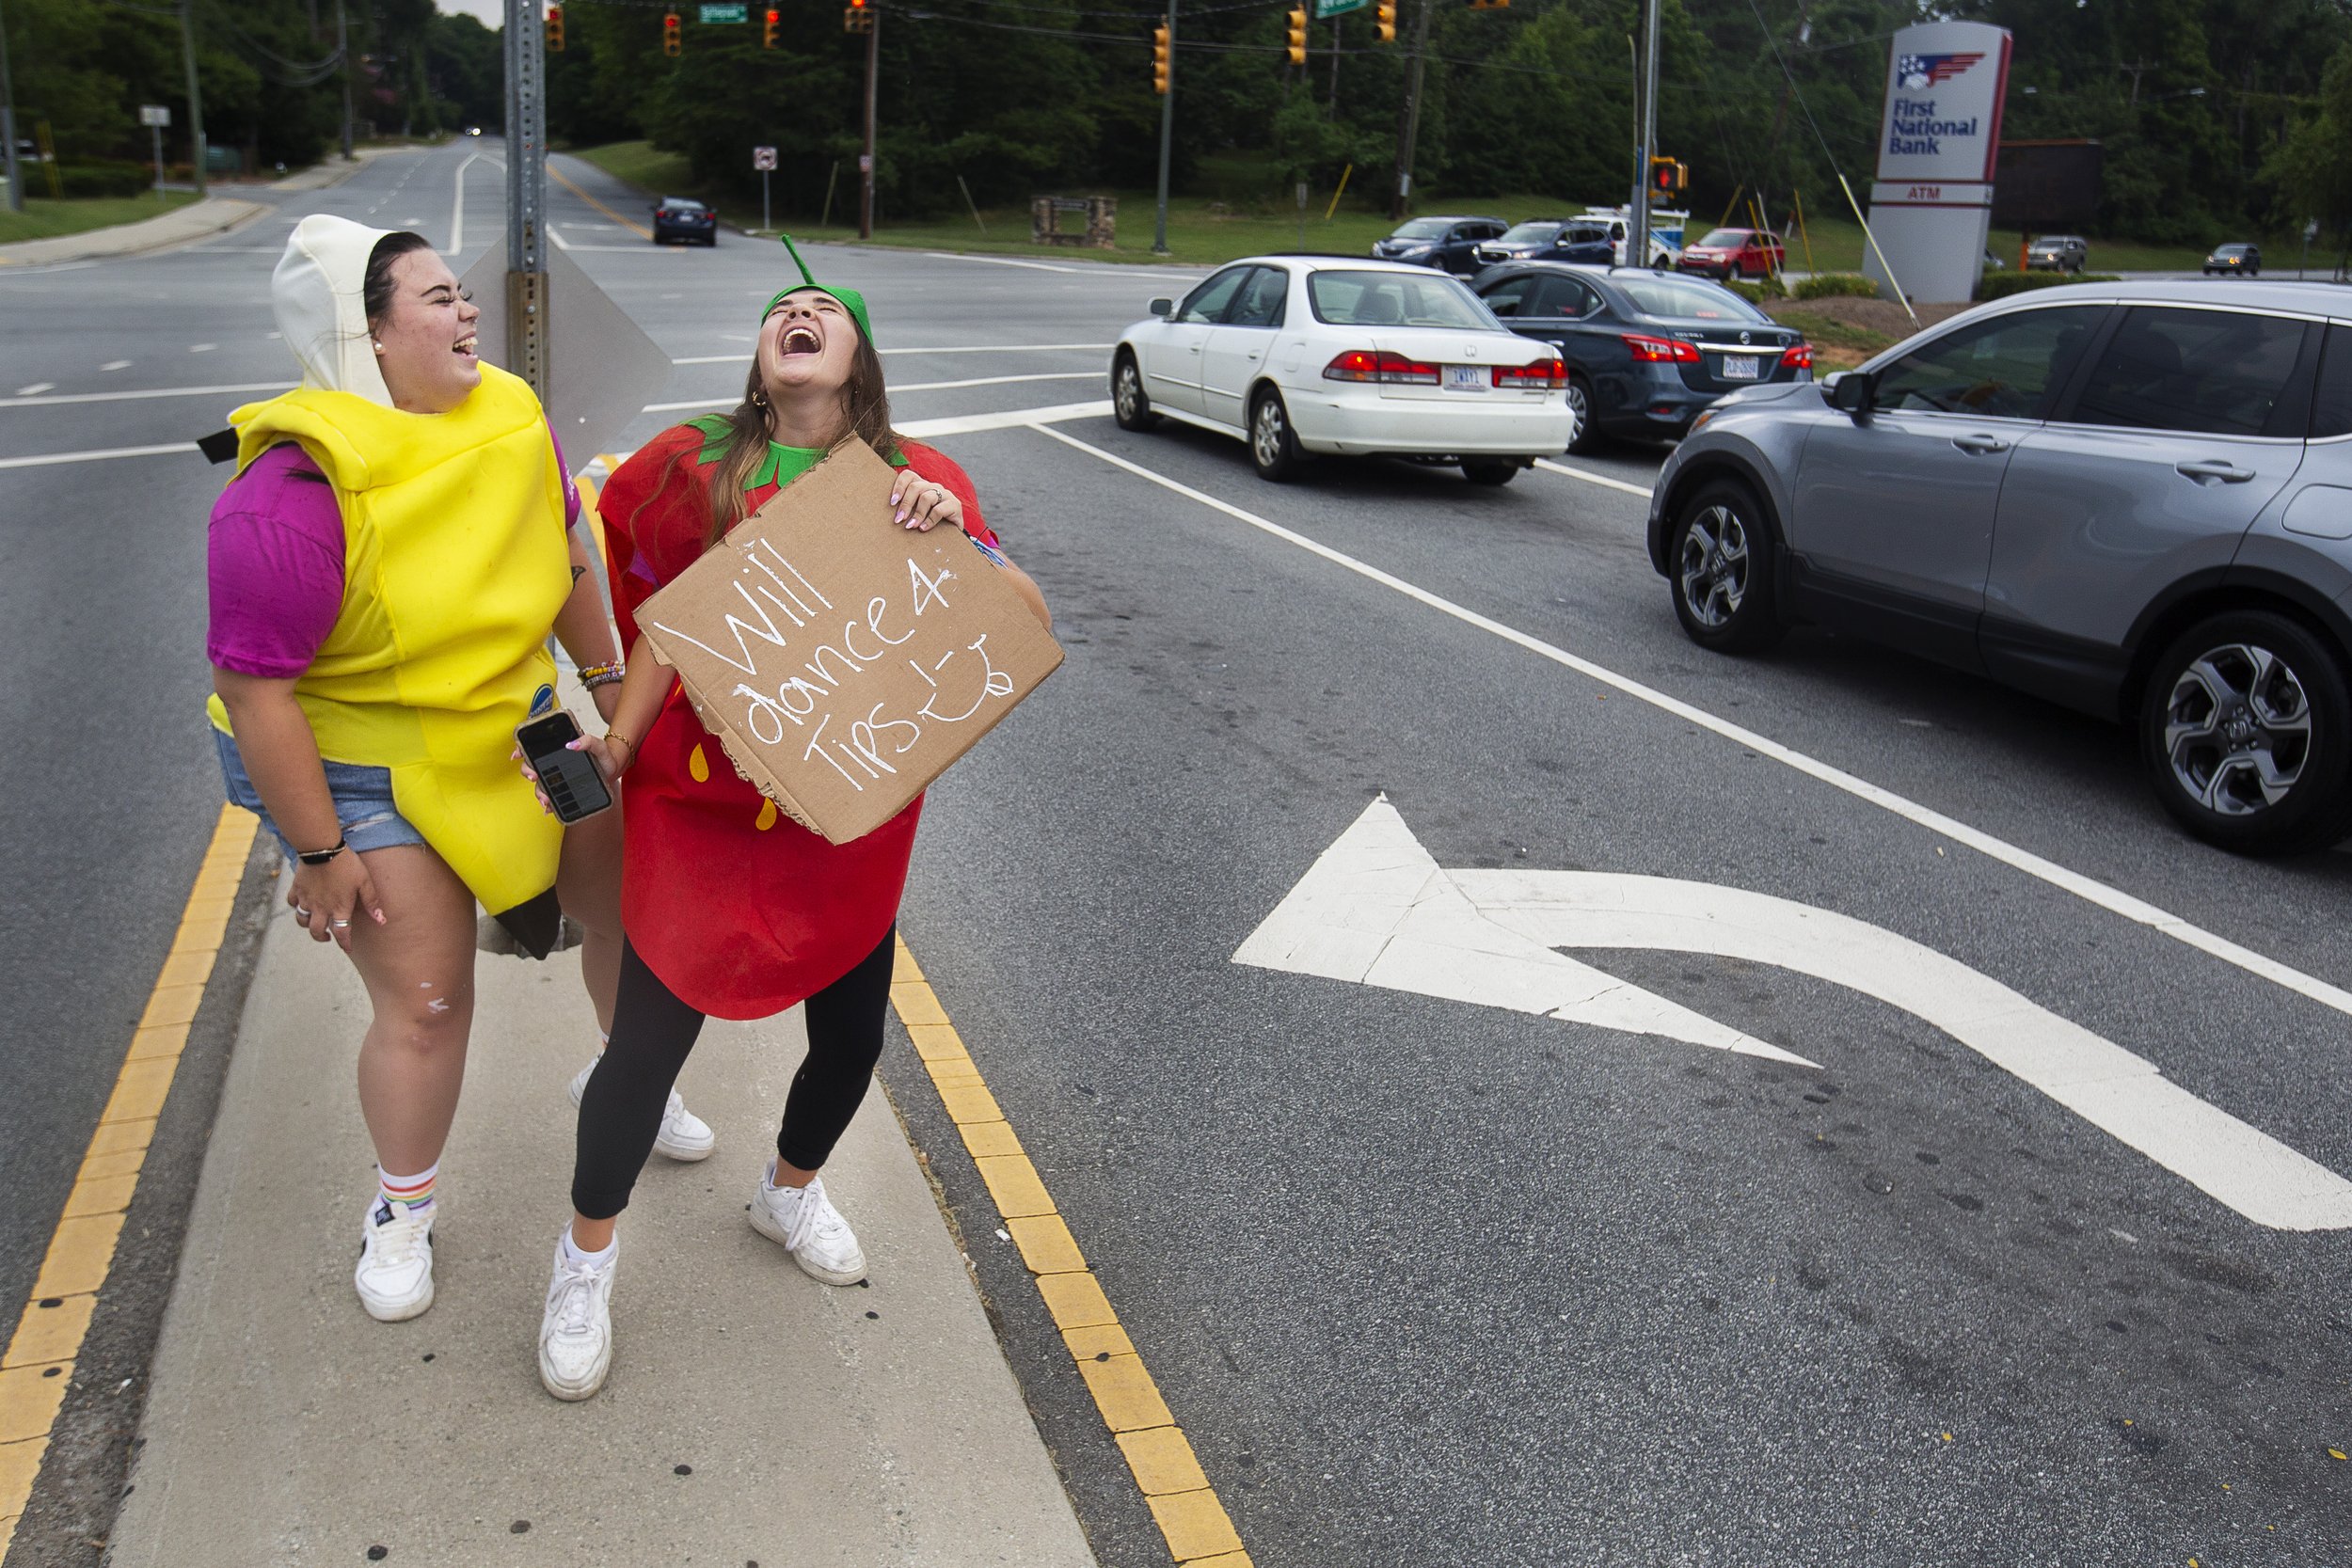  Dressed as a banana and strawberry, Grayson Kanoy (left) and Anna Conahan dance for tips while on break from Tropical Cafe at the intersection of New Garden Road and Battleground in Greensboro, N.C., on Friday, July 16, 2021. The pair said they were